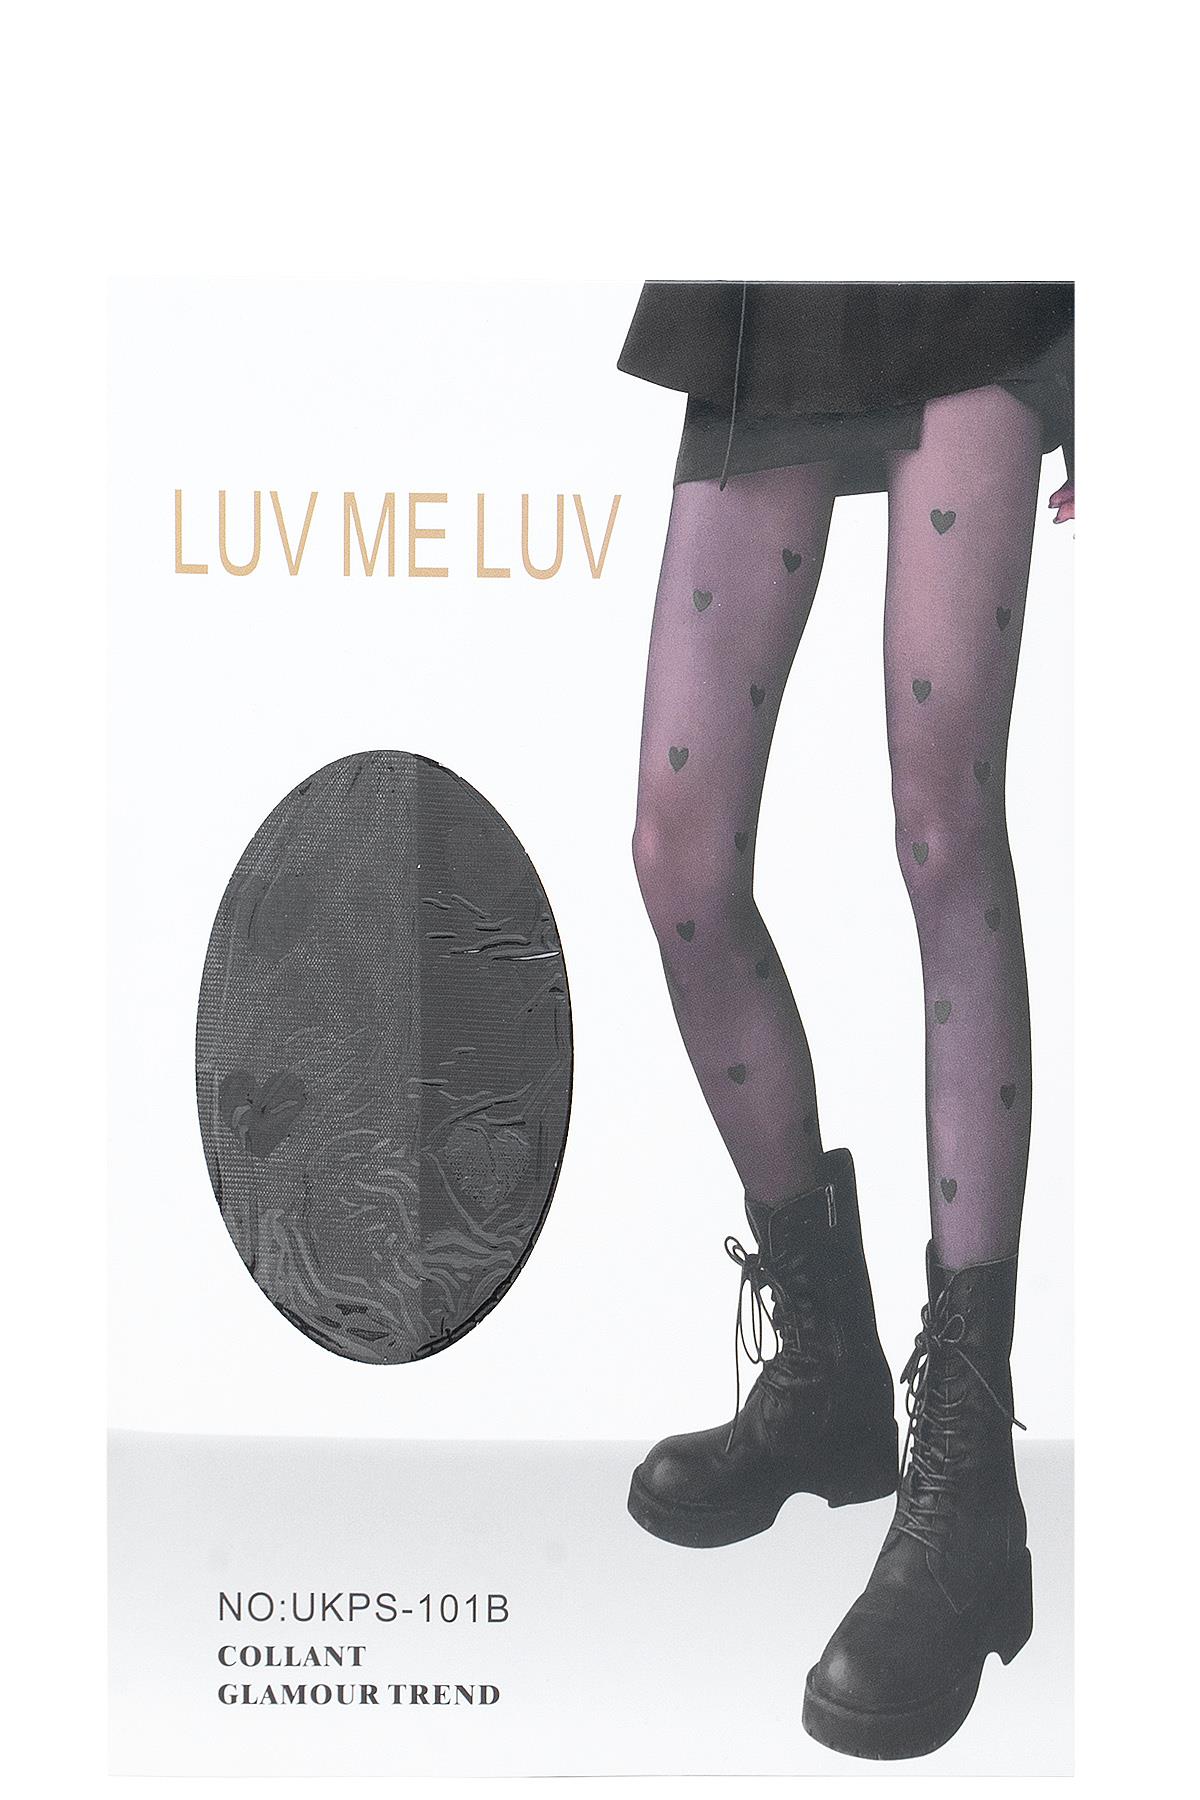 LUV ME LUV HEART KNIT DESIGN STOCKINGS (6 UNITS)